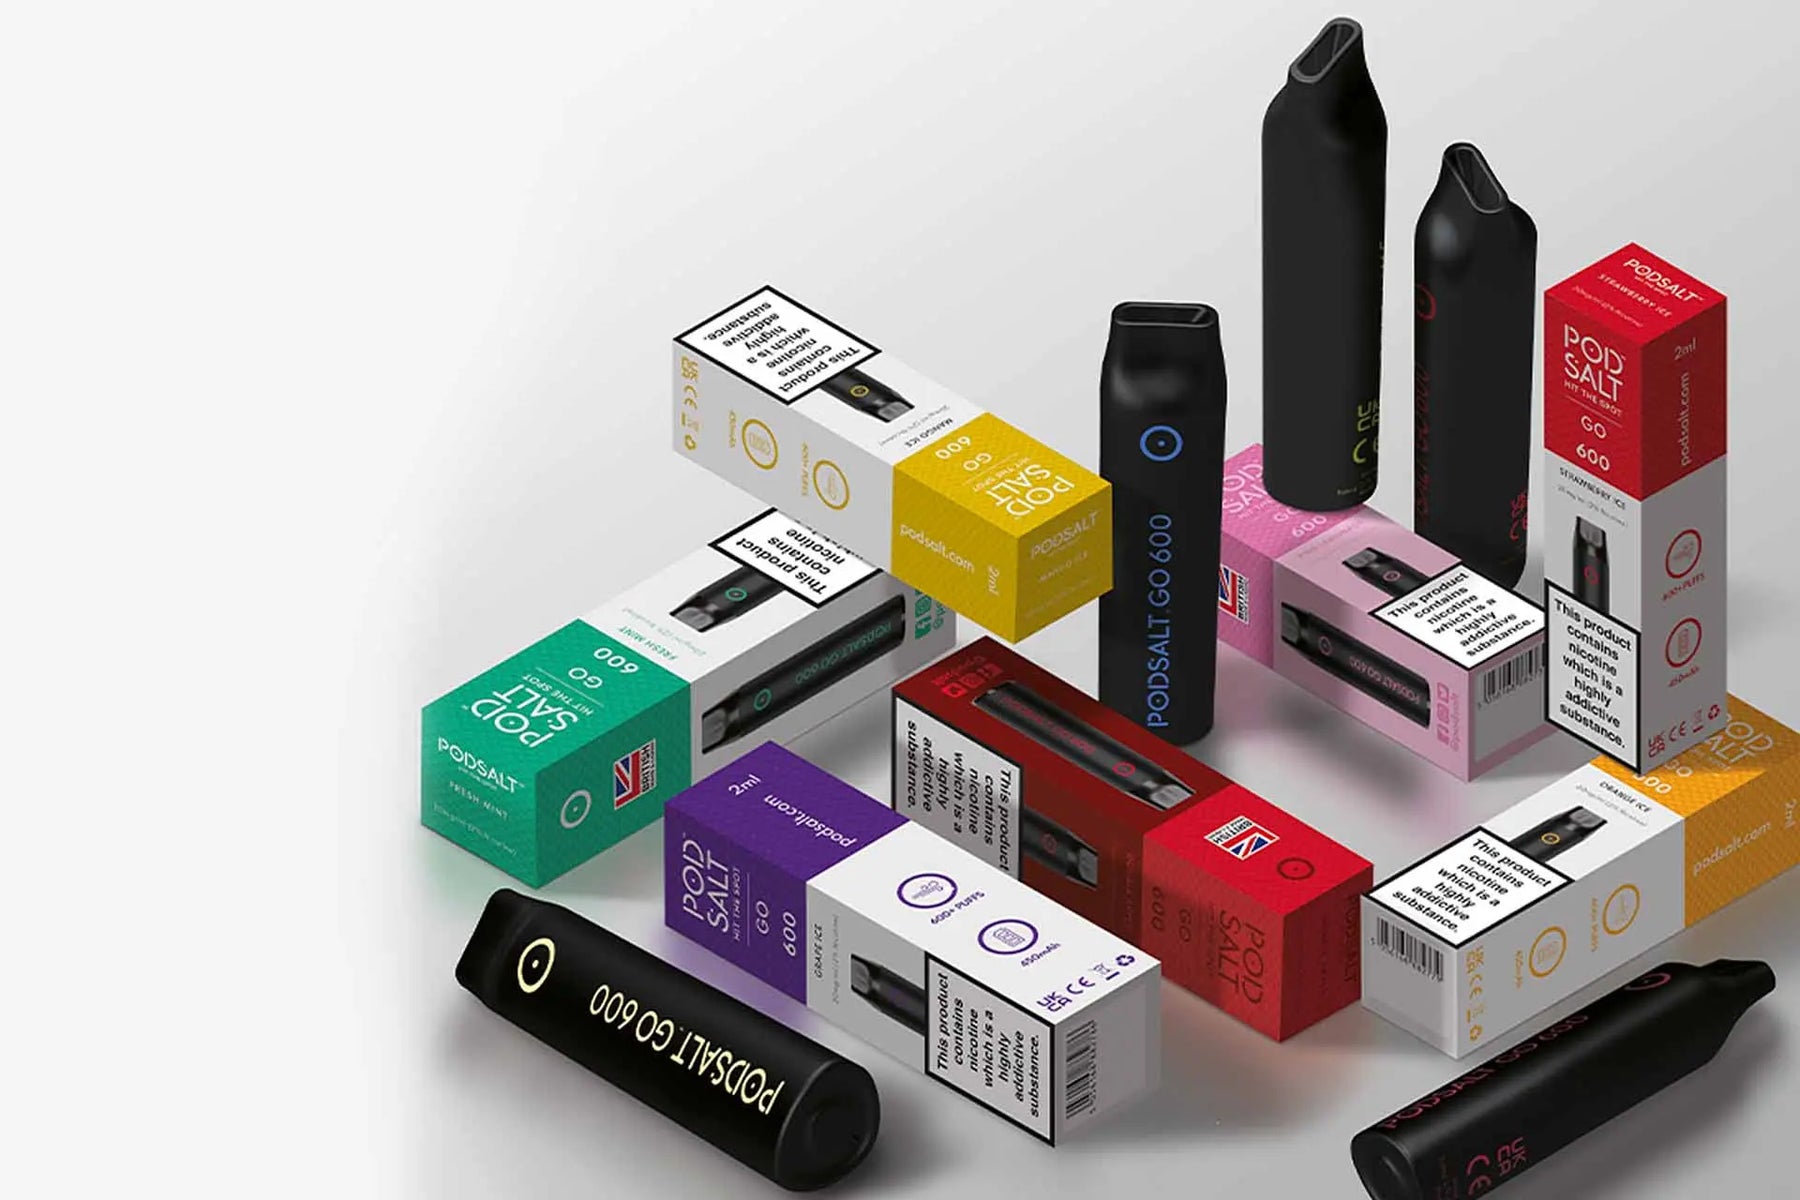 Vaping Trends Unveiled: What's Hot Right Now